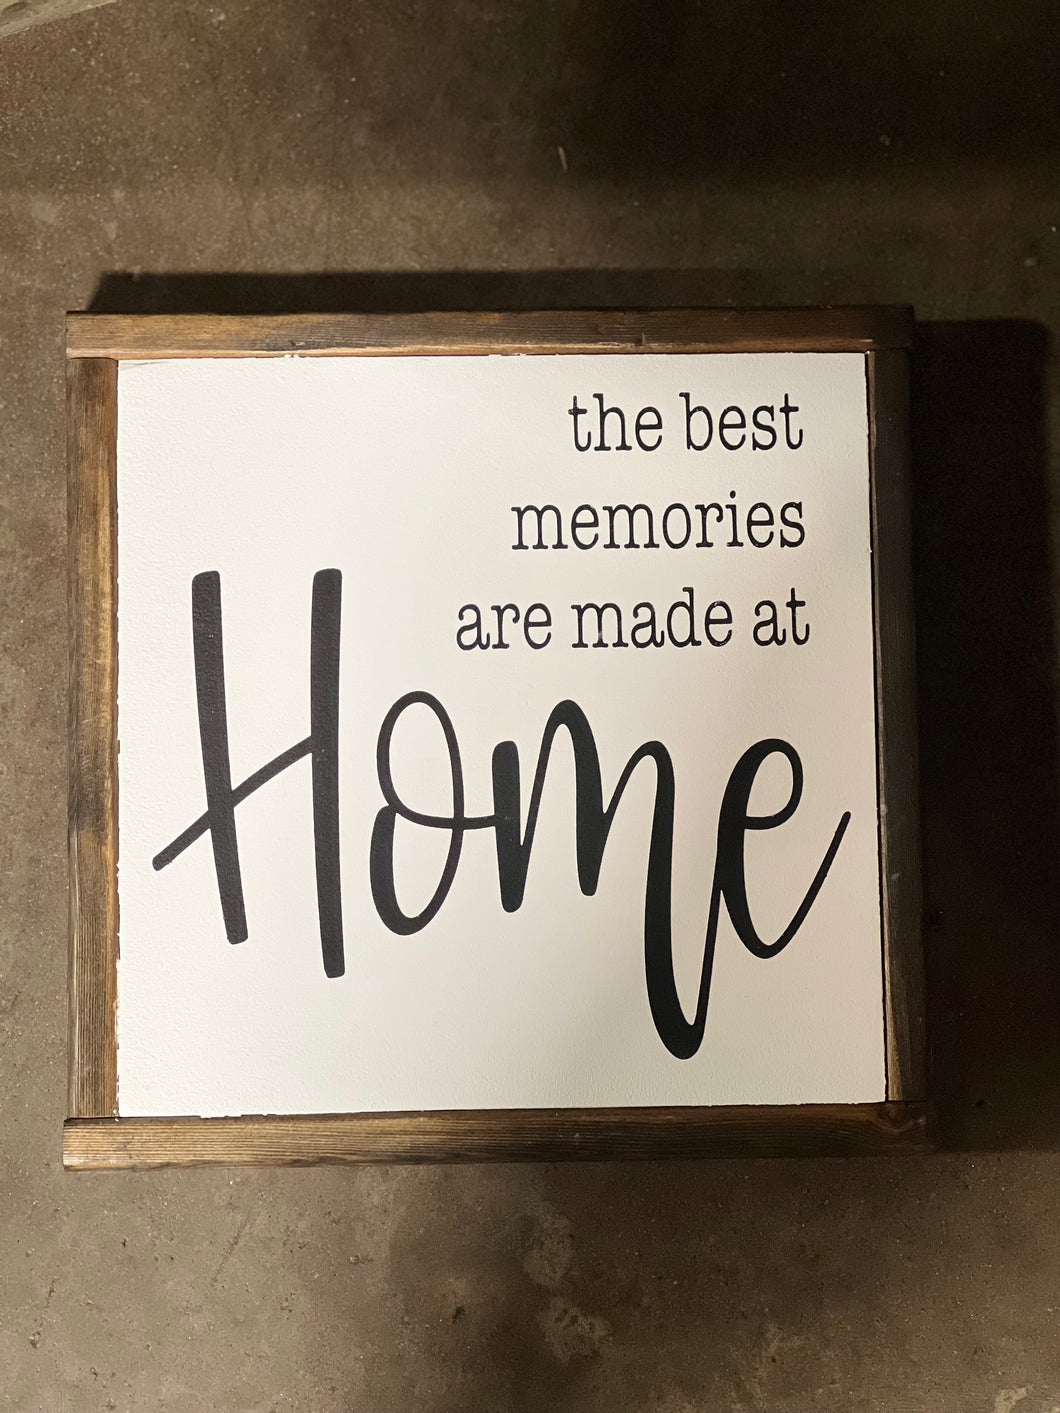 the best memories are made at Home